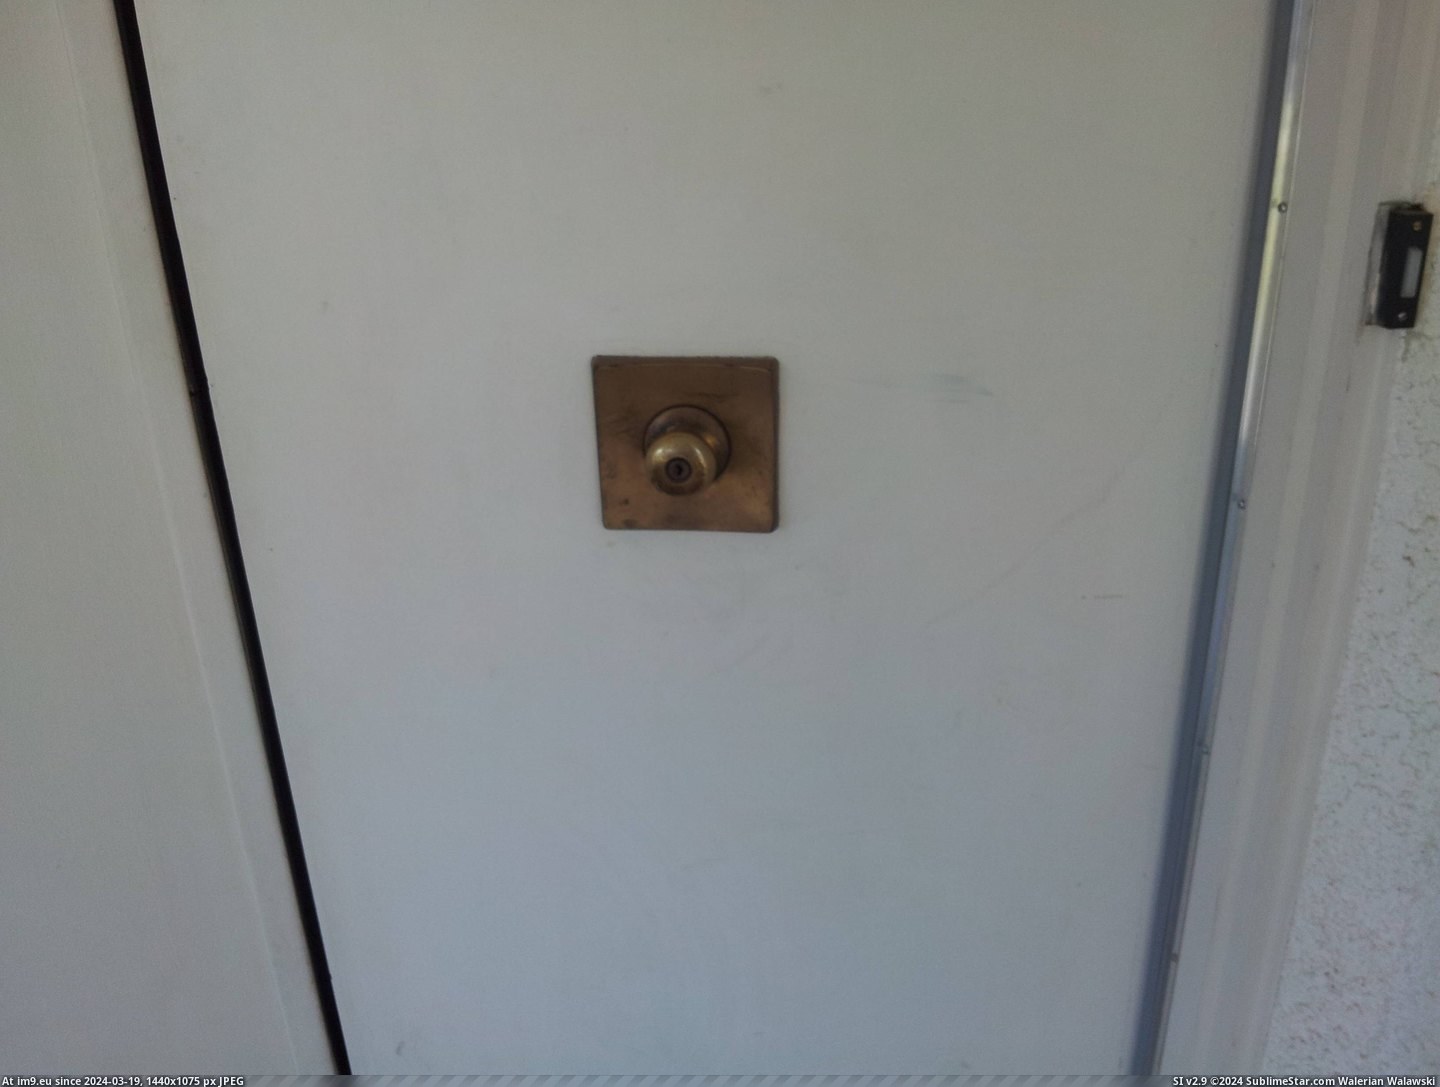 #Sister #House #Knobs #Door #Moved [Mildlyinteresting] My sister just moved into a house with door knobs in the middle of the door. 2 Pic. (Изображение из альбом My r/MILDLYINTERESTING favs))